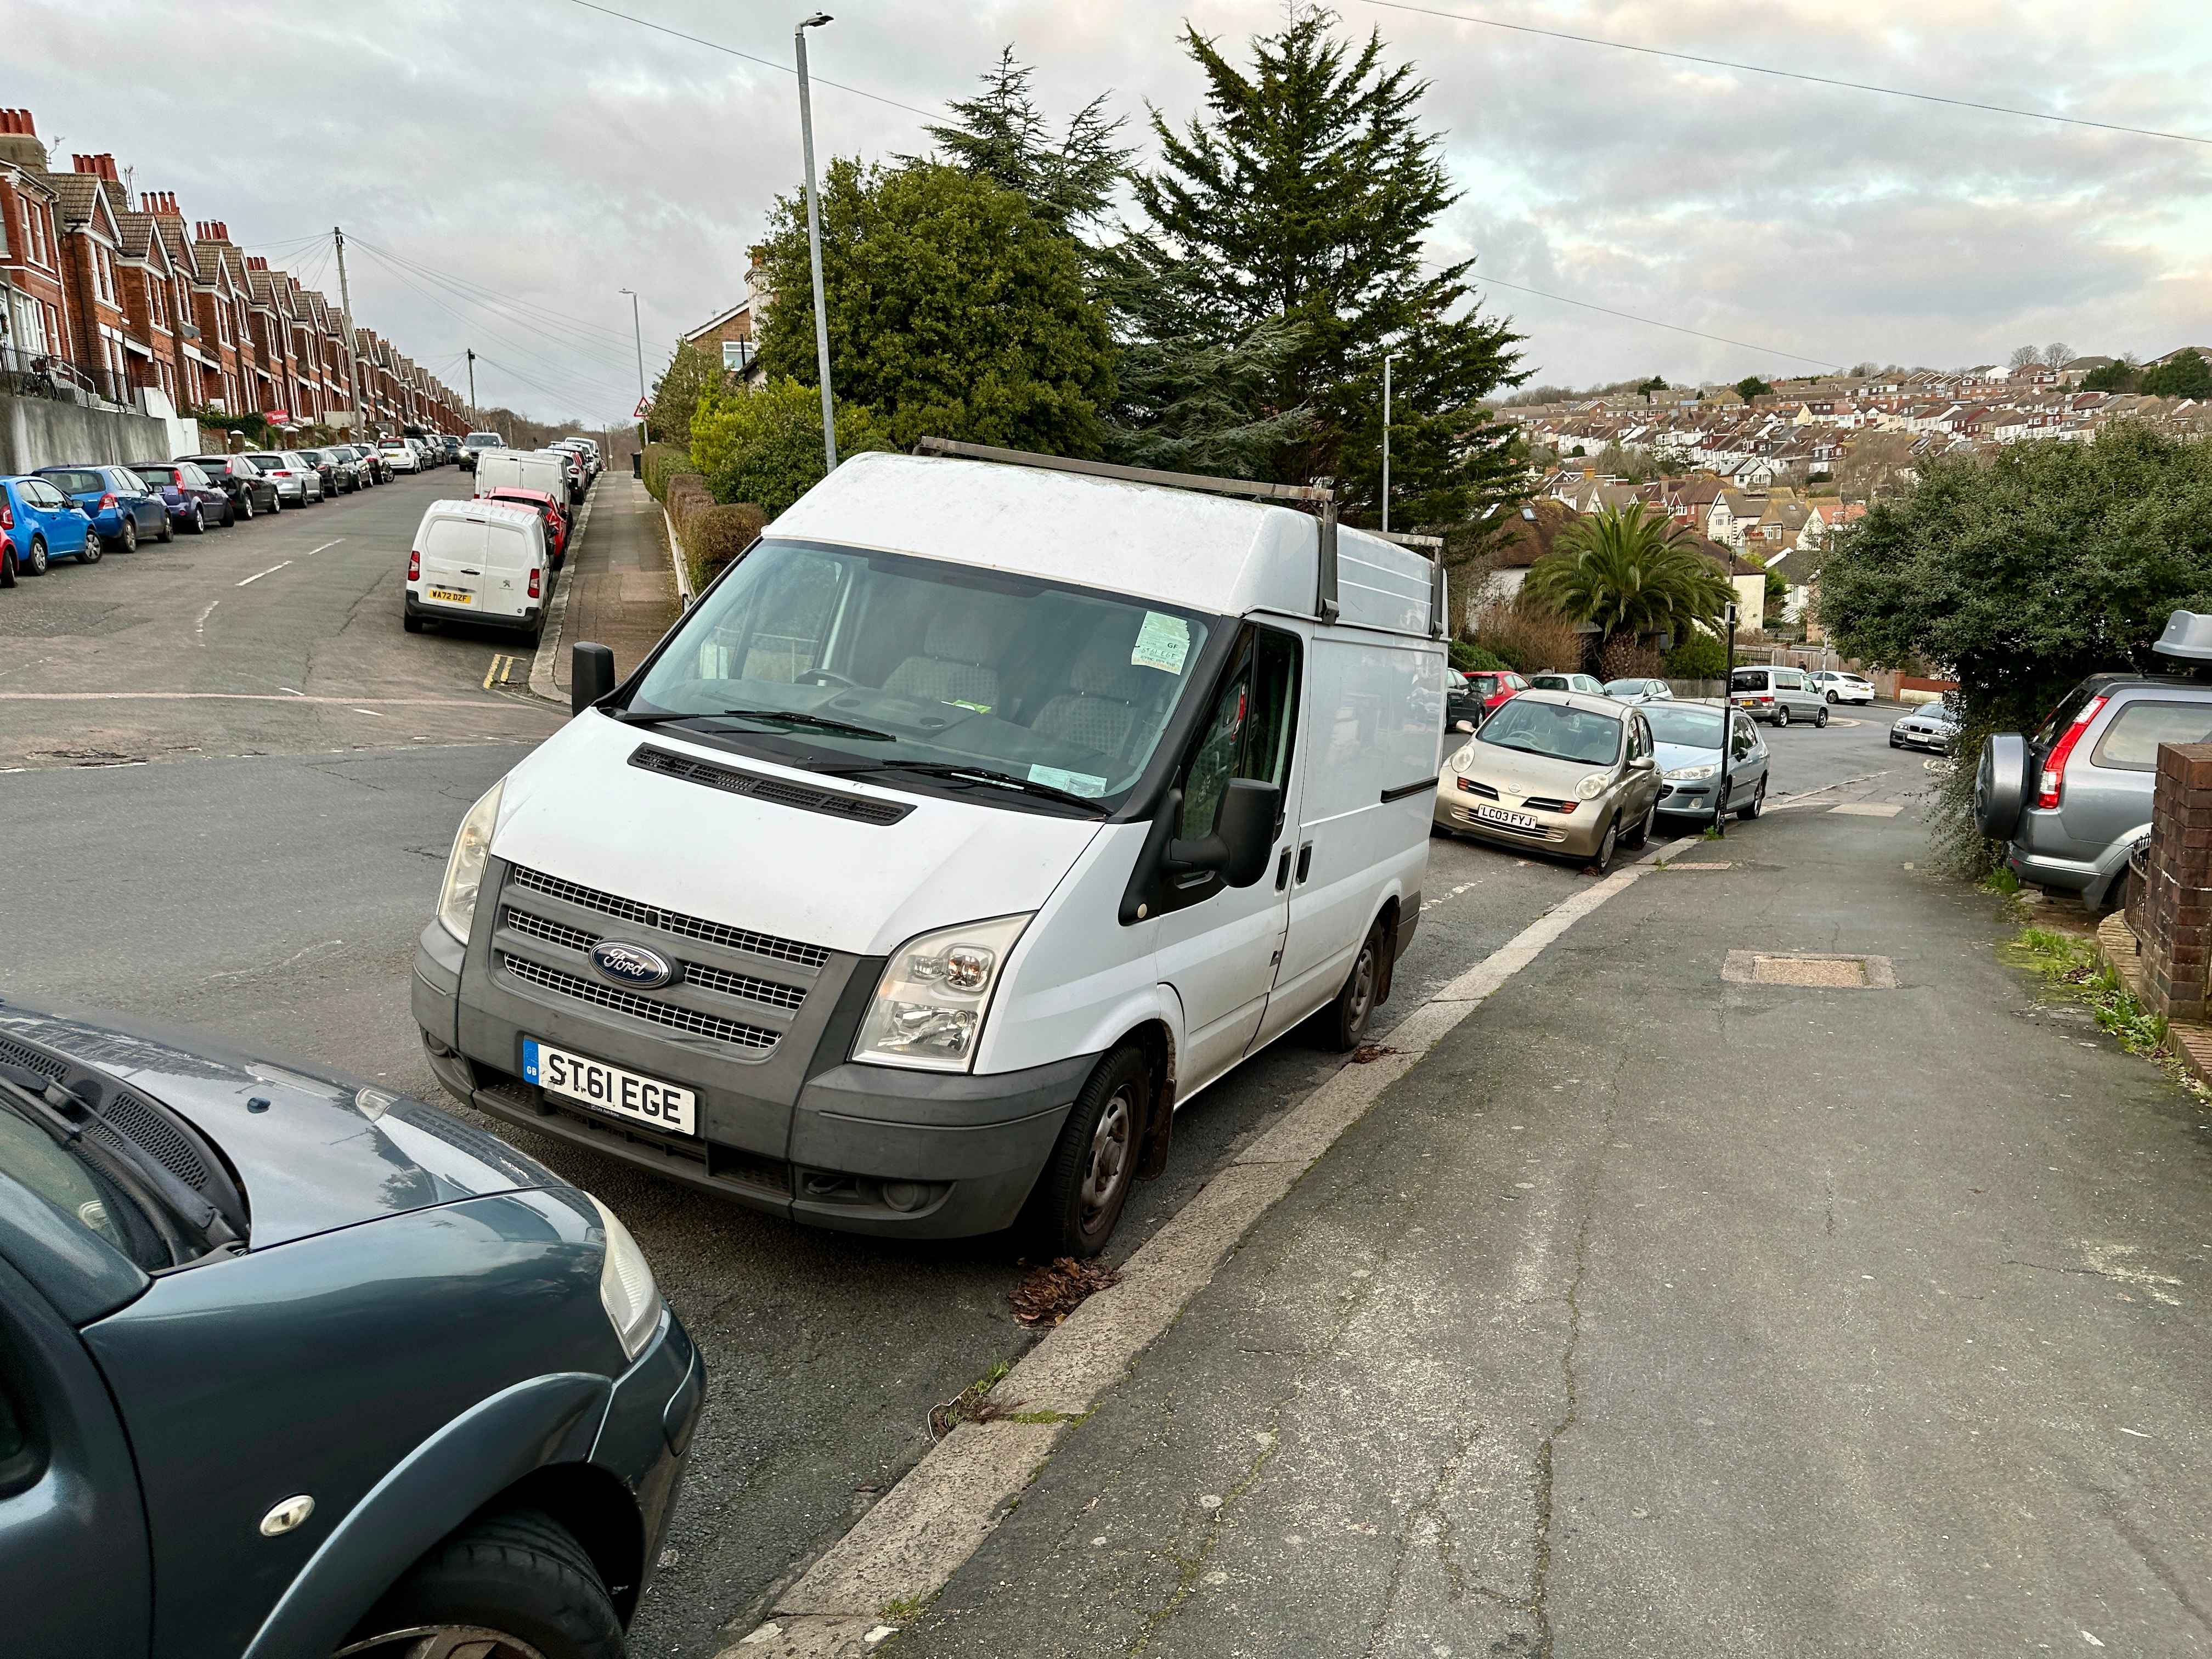 Photograph of ST61 EGE - a White Ford Transit parked in Hollingdean by a non-resident. The sixth of six photographs supplied by the residents of Hollingdean.